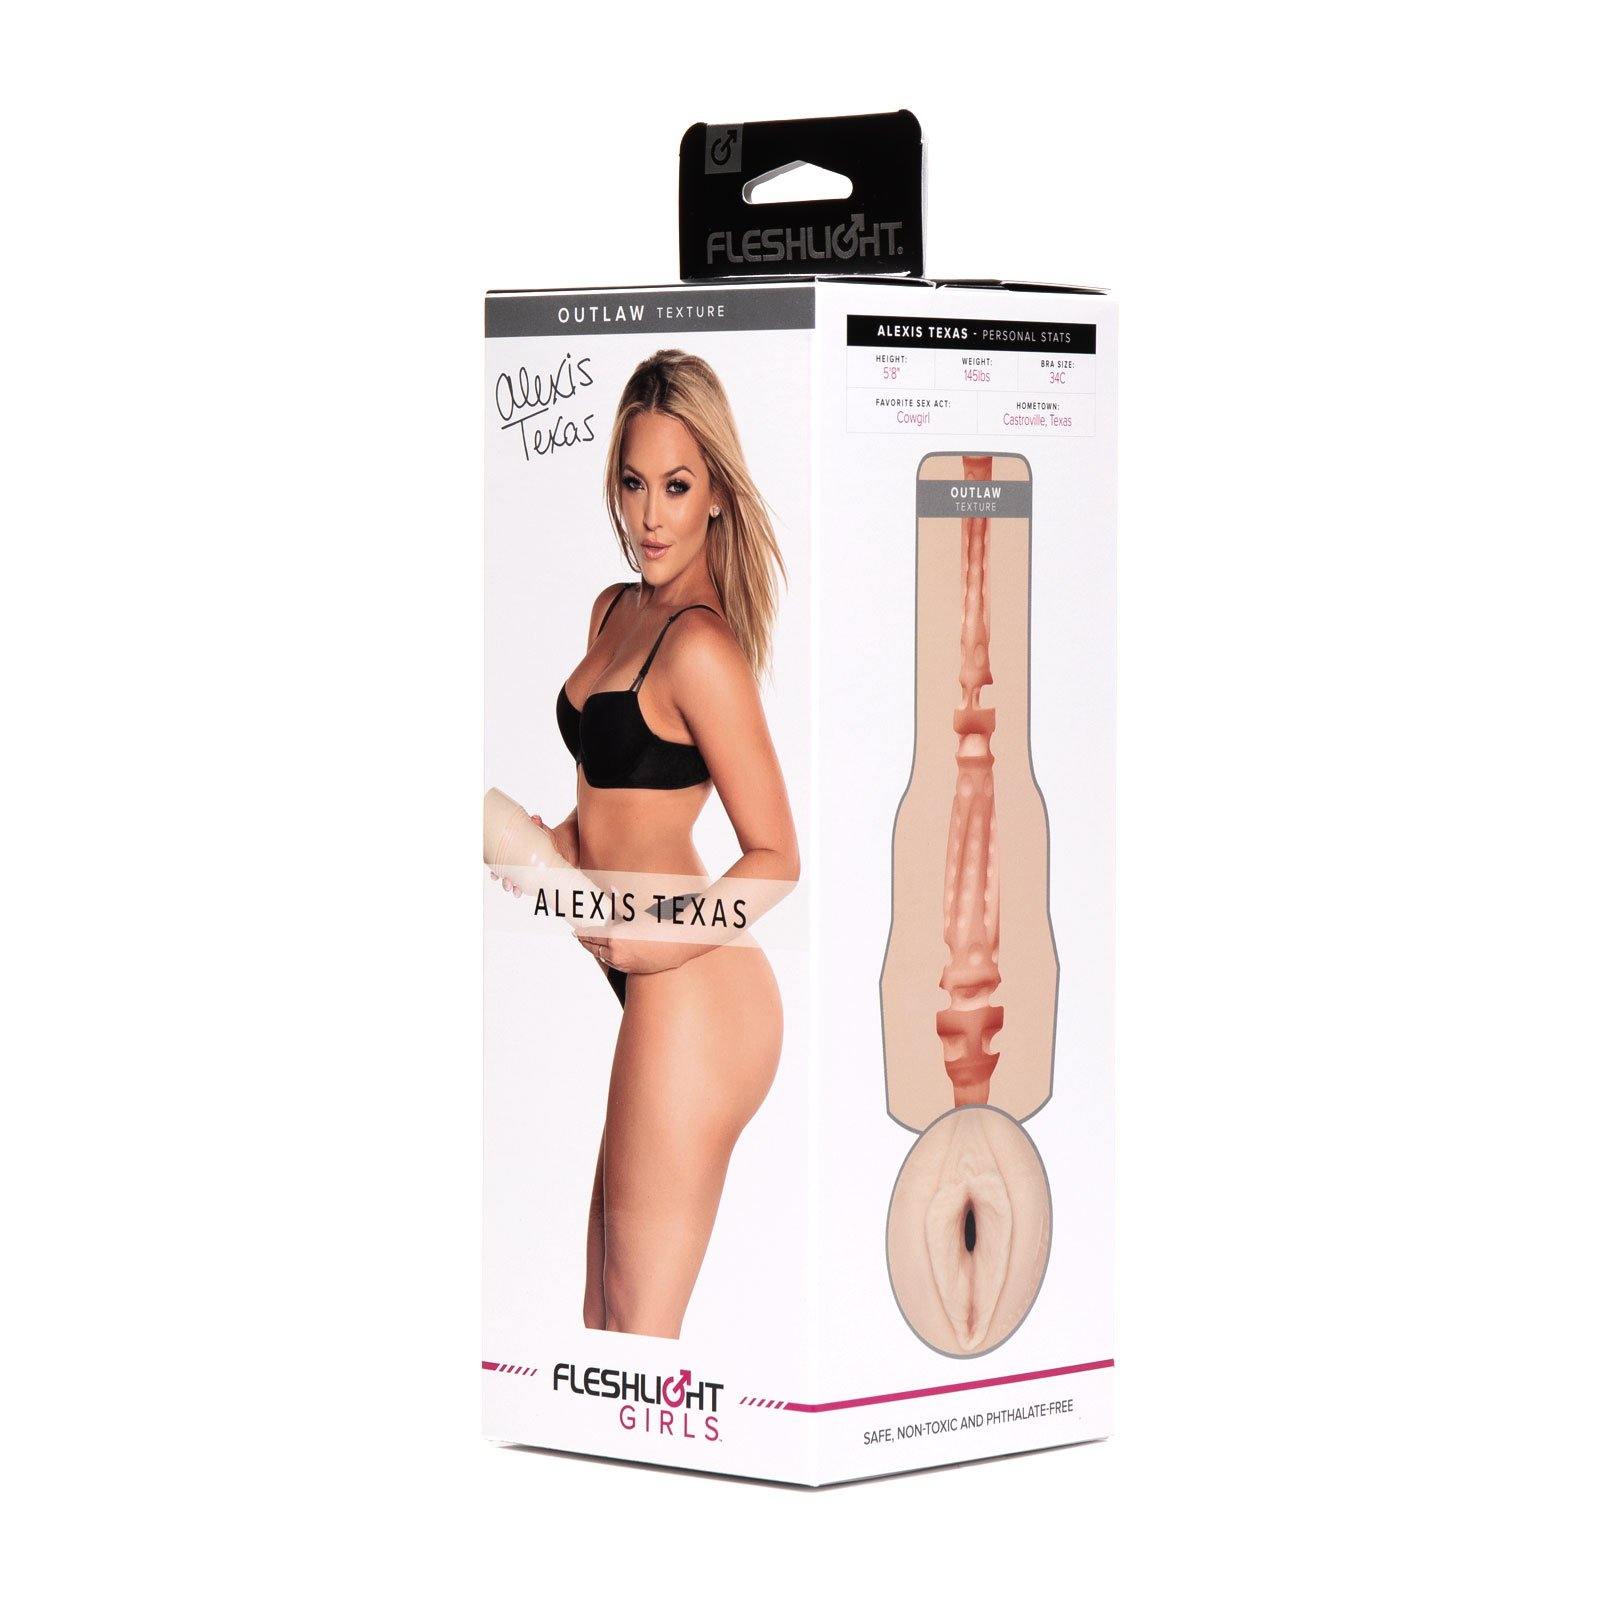 Fleshlight Girls Alexis Texas Outlaw - Buy At Luxury Toy X - Free 3-Day Shipping